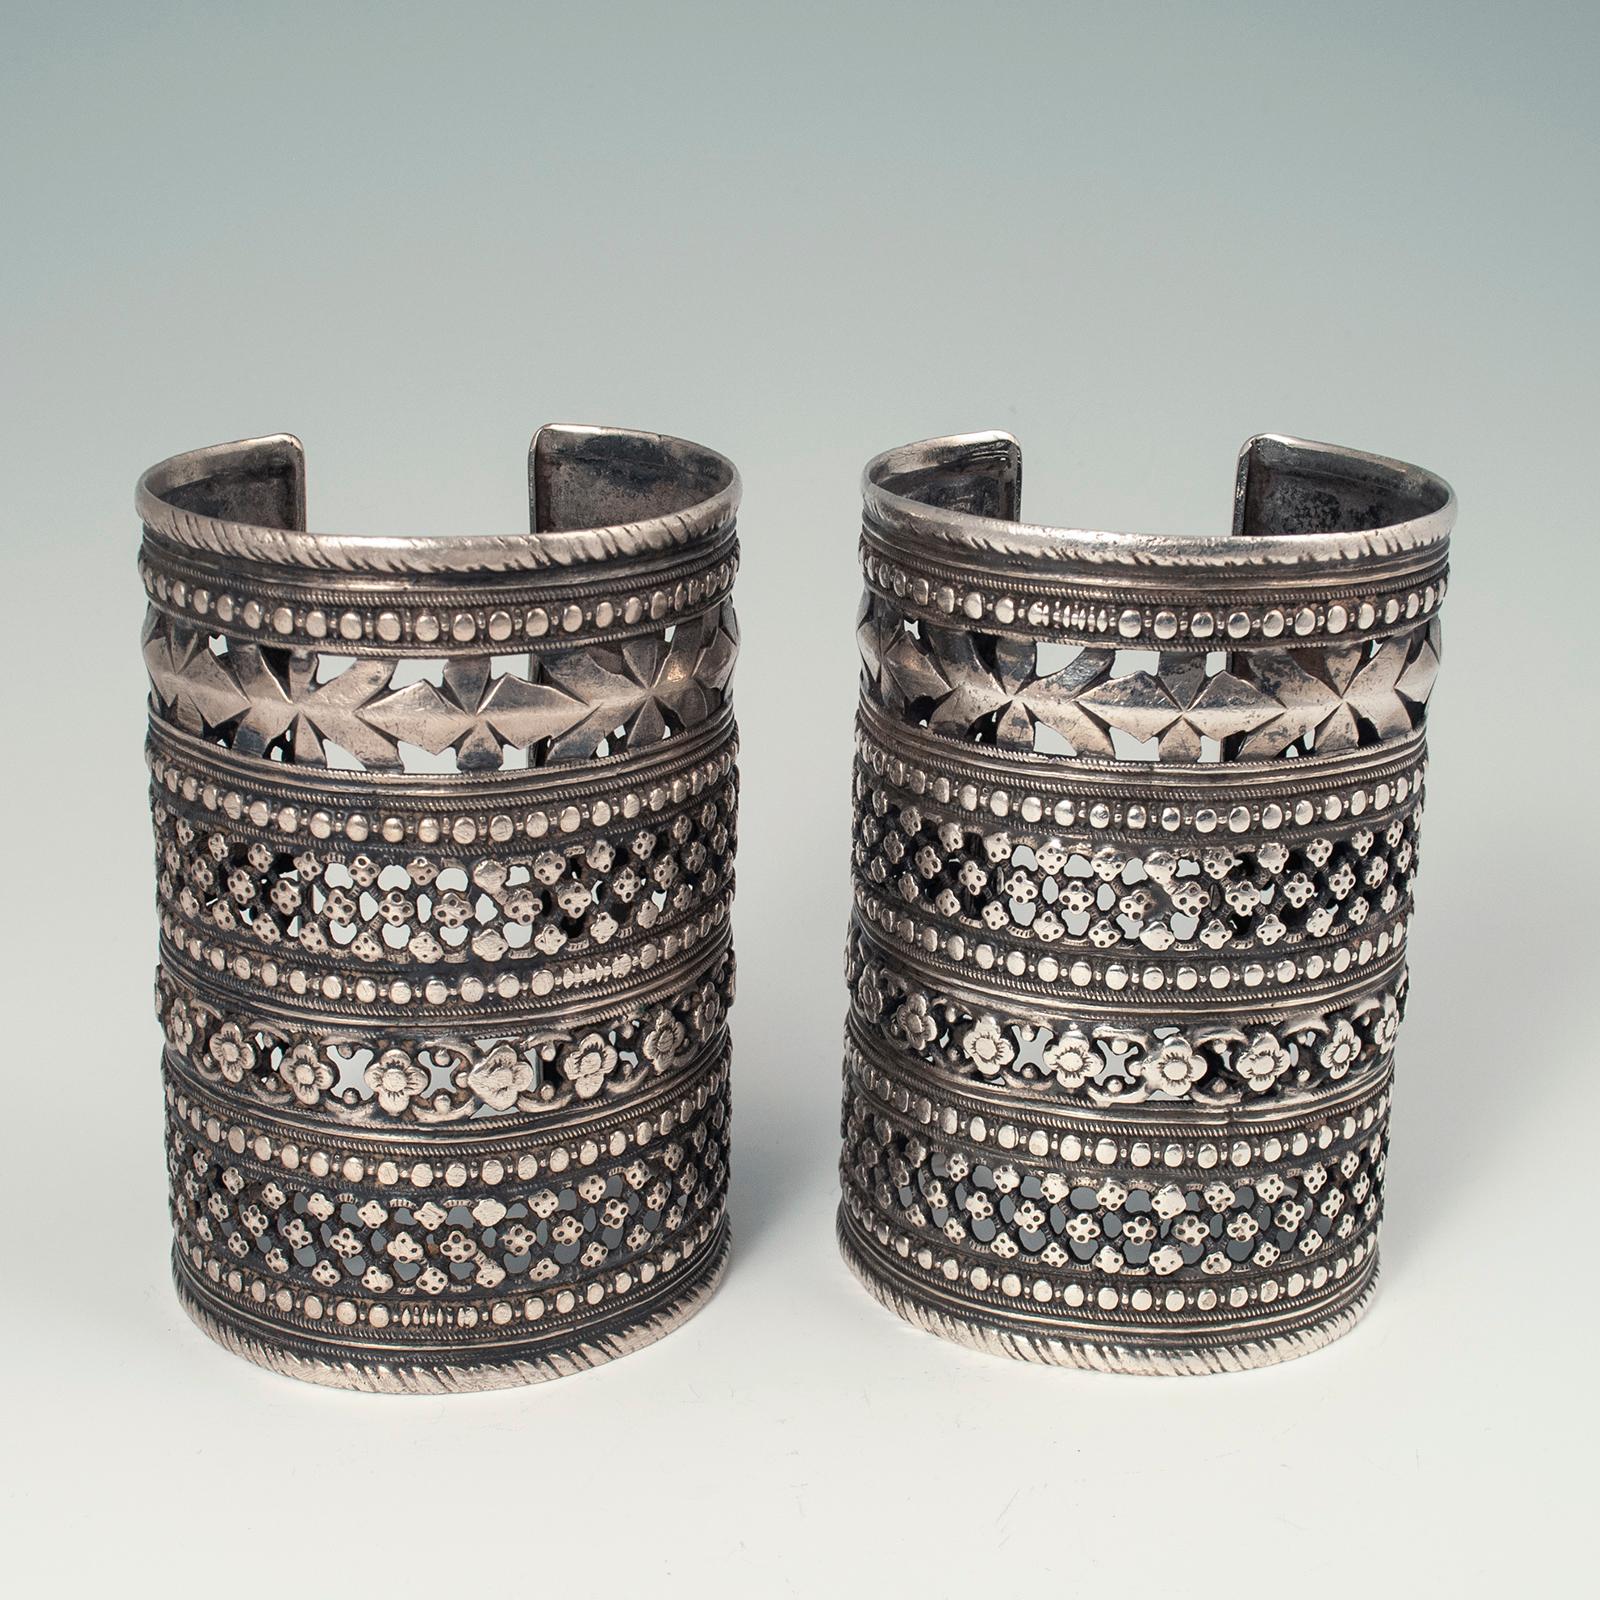 Mid-20th century silver tribal cuffs, Hazara tribe, Afghanistan

A pair of silver cuffs worn by women of the Hazara tribe in Afghanistan. Very good workmanship and condition. Weight is 200 grams each. 8.25 inch interior circumference, 4.25 inches